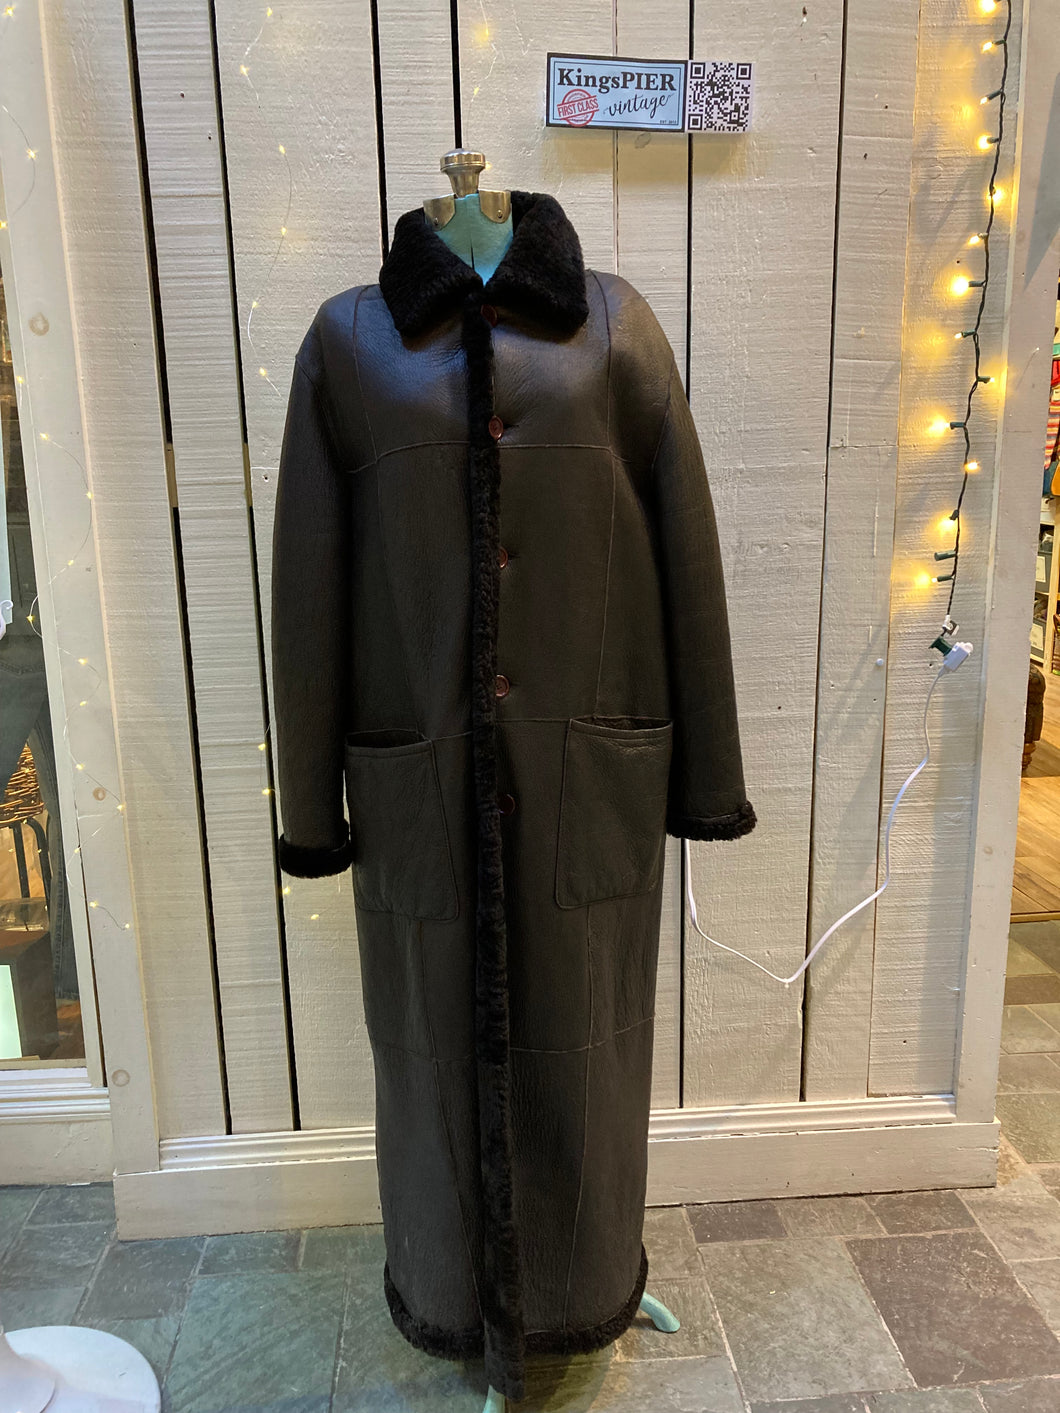 Kingspier Vintage - Vintage EZ Versoil Sole long shearling coat with button closures and patch pockets.

Made in Argentina.